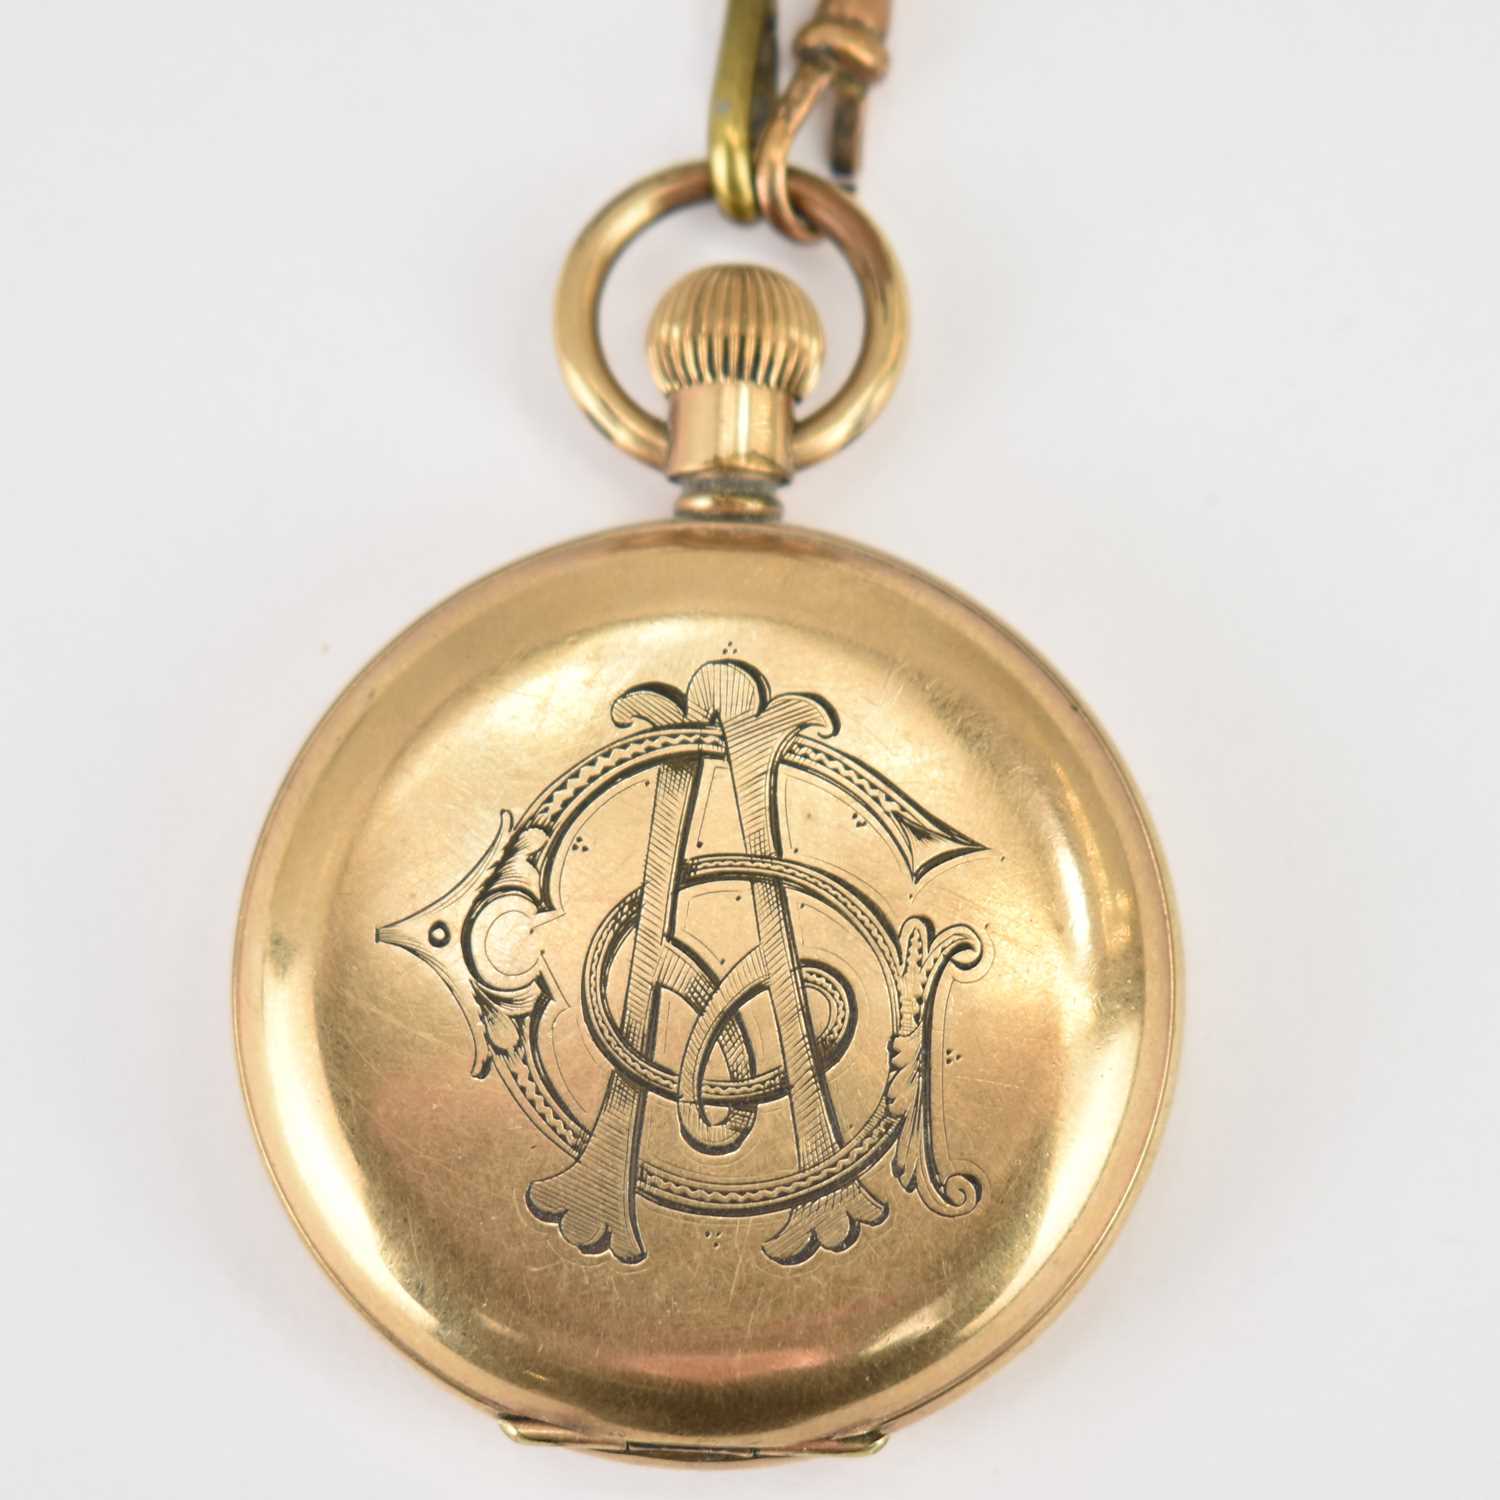 LANCASHIRE WATCH CO; a Prescot gold plated full hunter pocket watch, the white enamelled dial set - Image 3 of 3